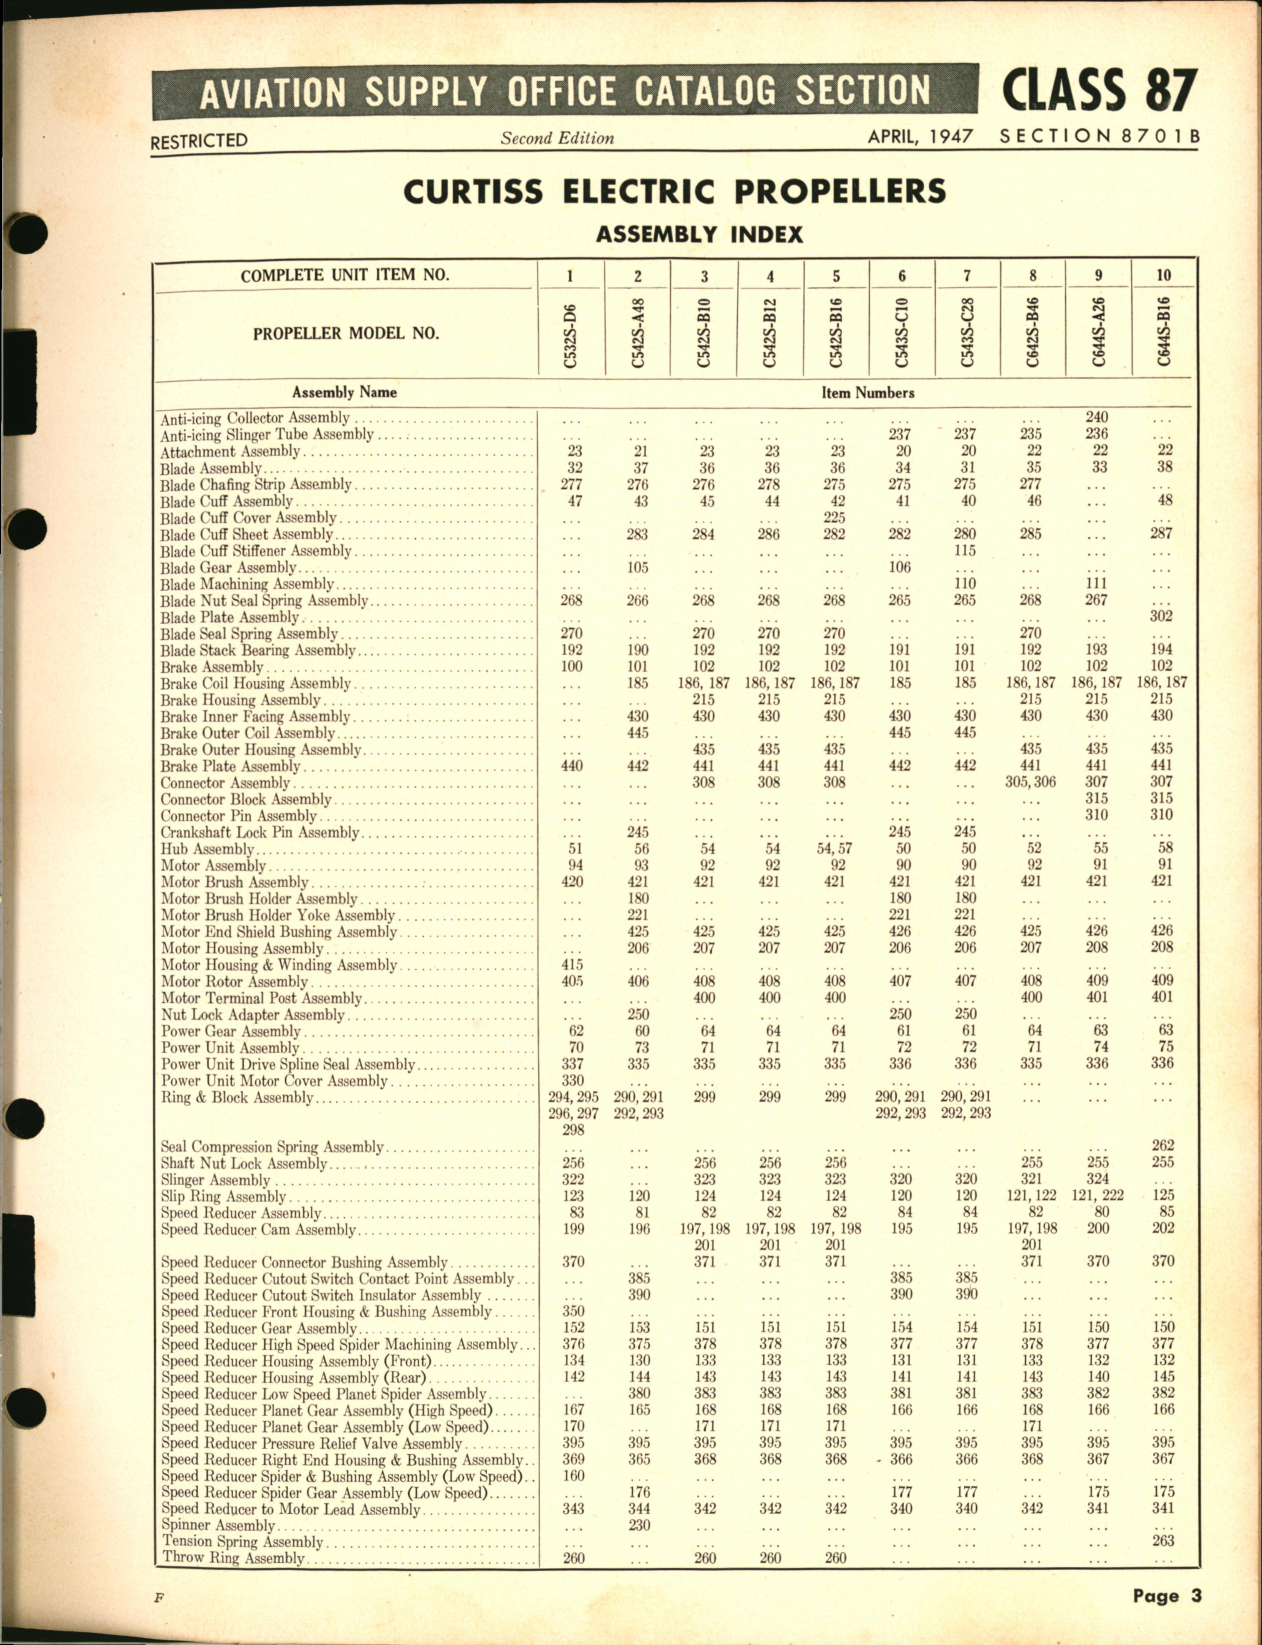 Sample page 3 from AirCorps Library document: Curtiss Electric Propellers